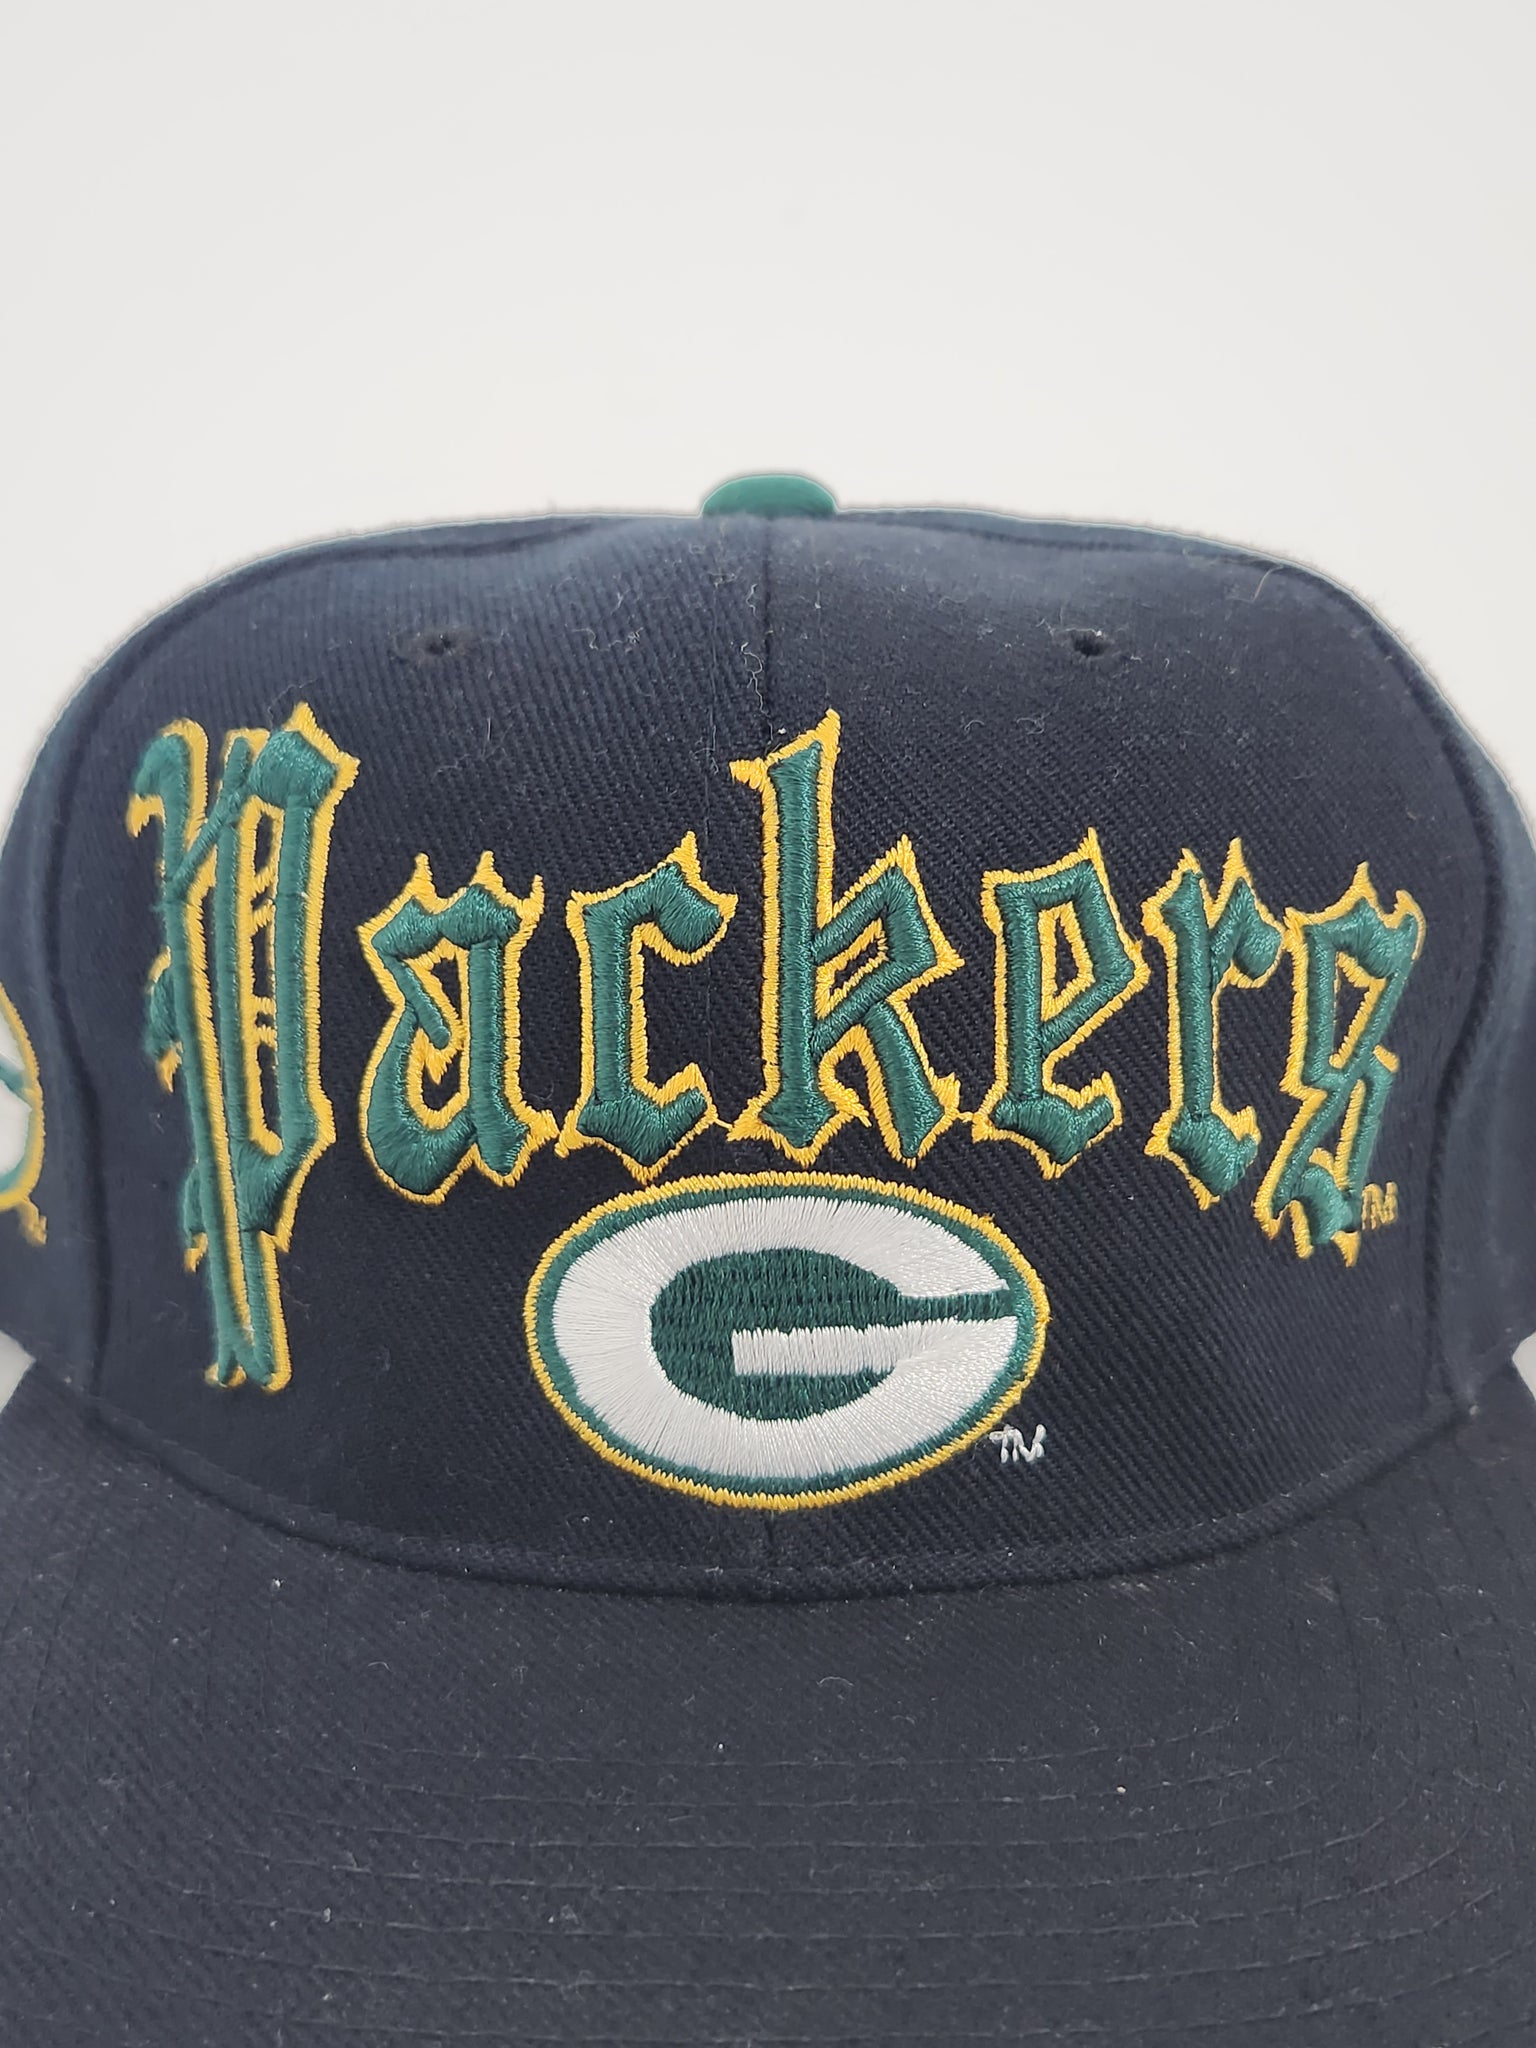 Green Bay Packers NFL Vintage Mitchell & Ness Snapback Hat